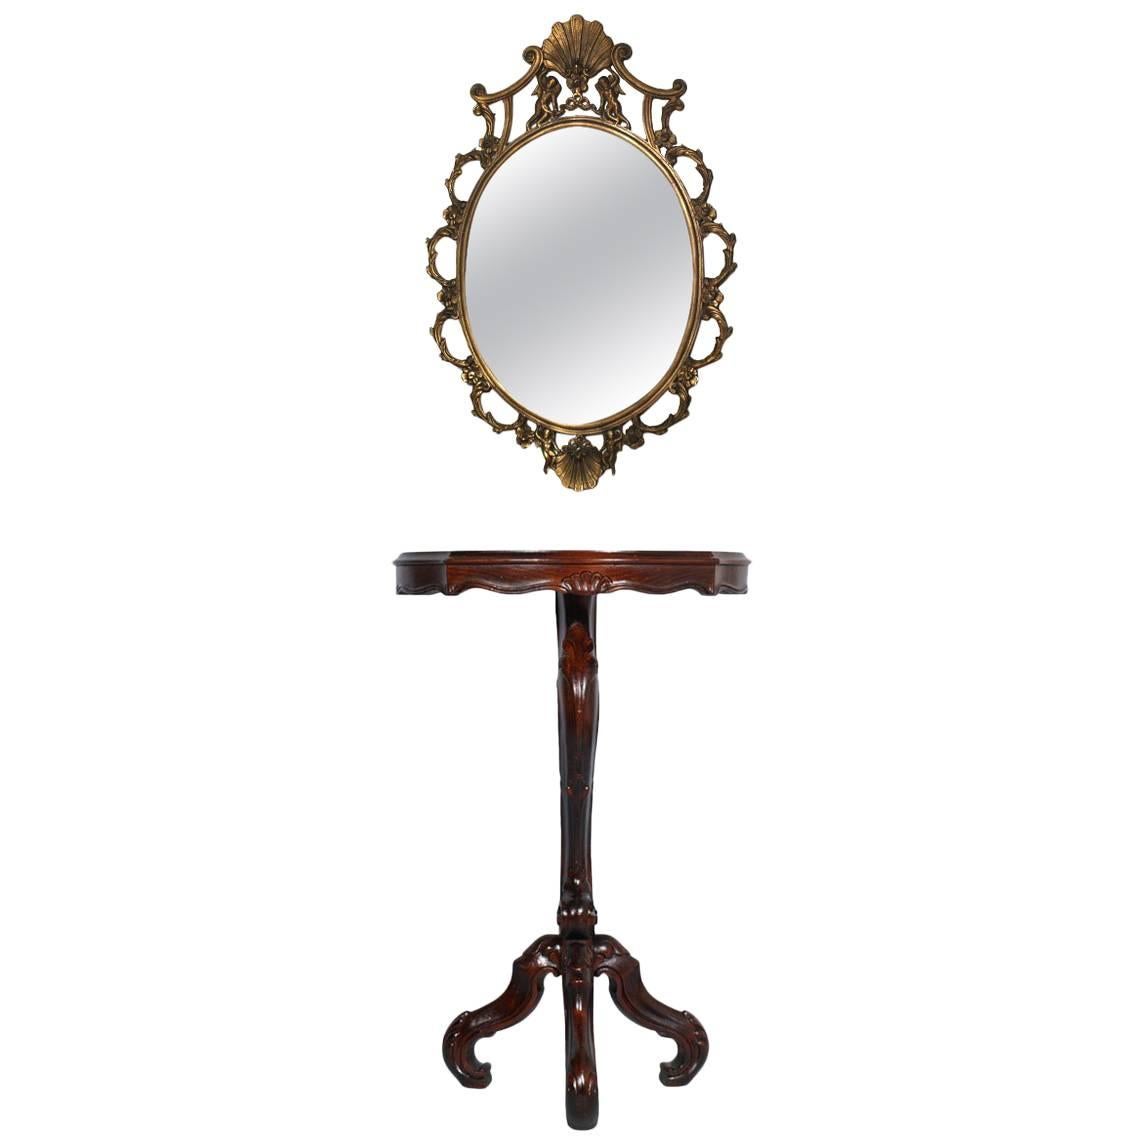 They can be sold separately
Art Nouveau Venetian gilt bronze mirror Vincenzo Cadorin attributed, circa 1900s.
Important and precious frame in gilded bronze richly embellished with putti, shells and acanthus leaves widespread in the Italian